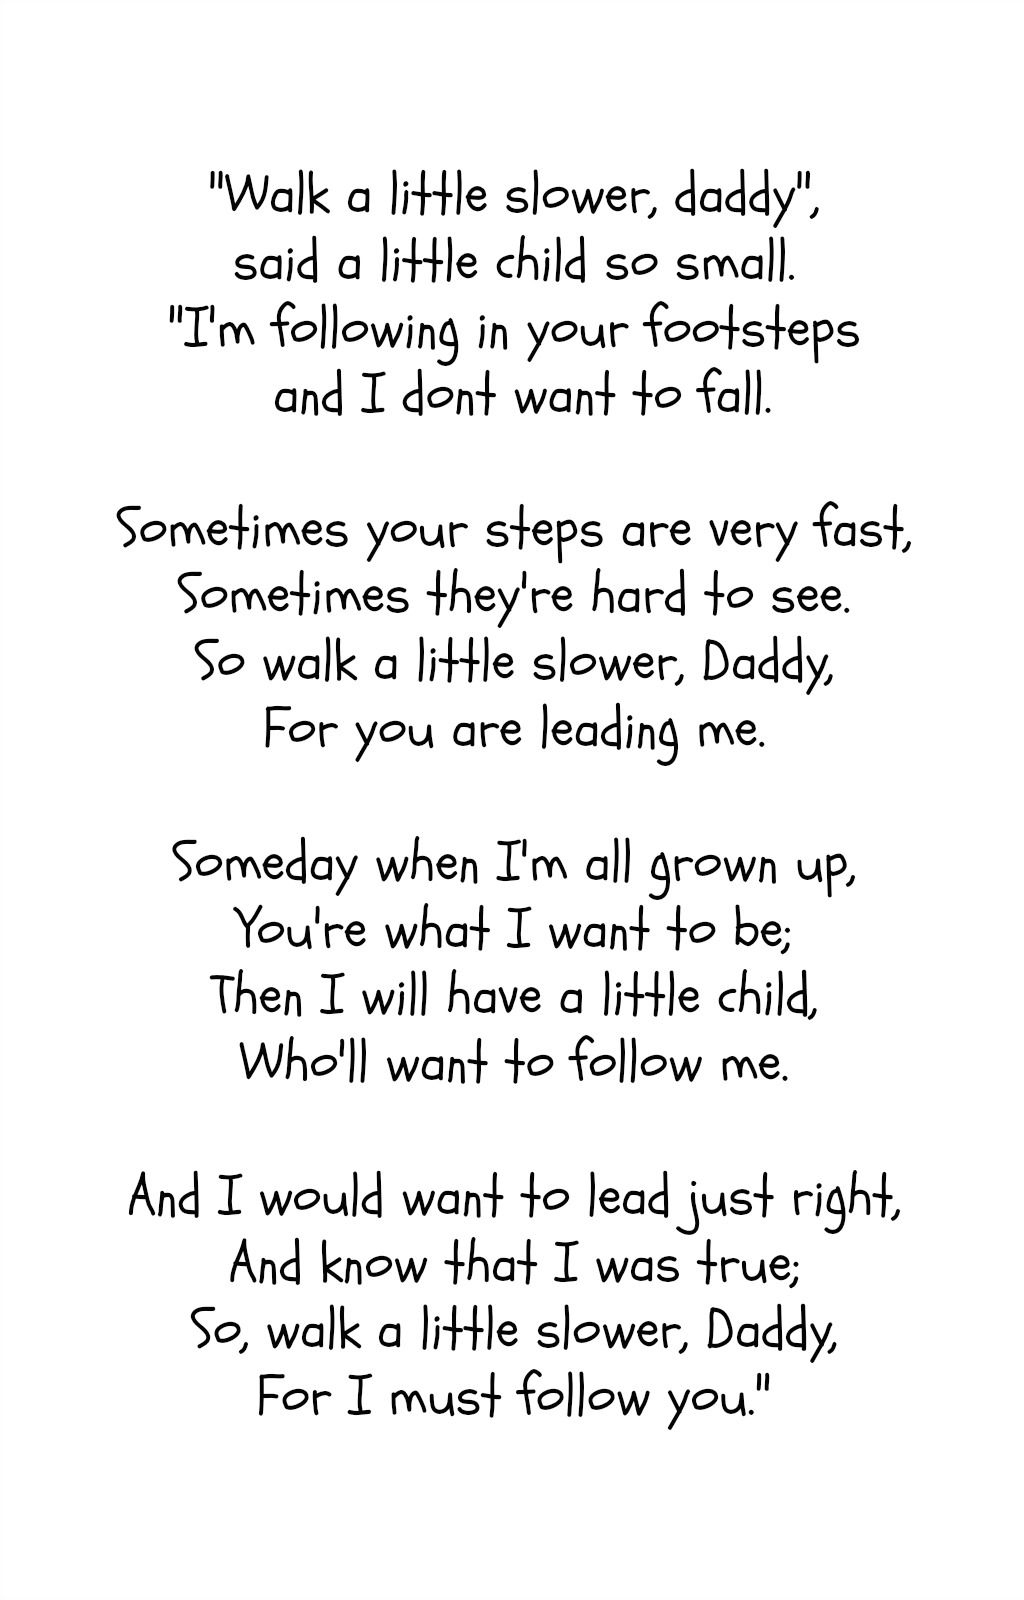 Father&amp;#039;s Day Poem- Free Printable | Interesting | Pinterest - Free Printable Fathers Day Poems For Preschoolers